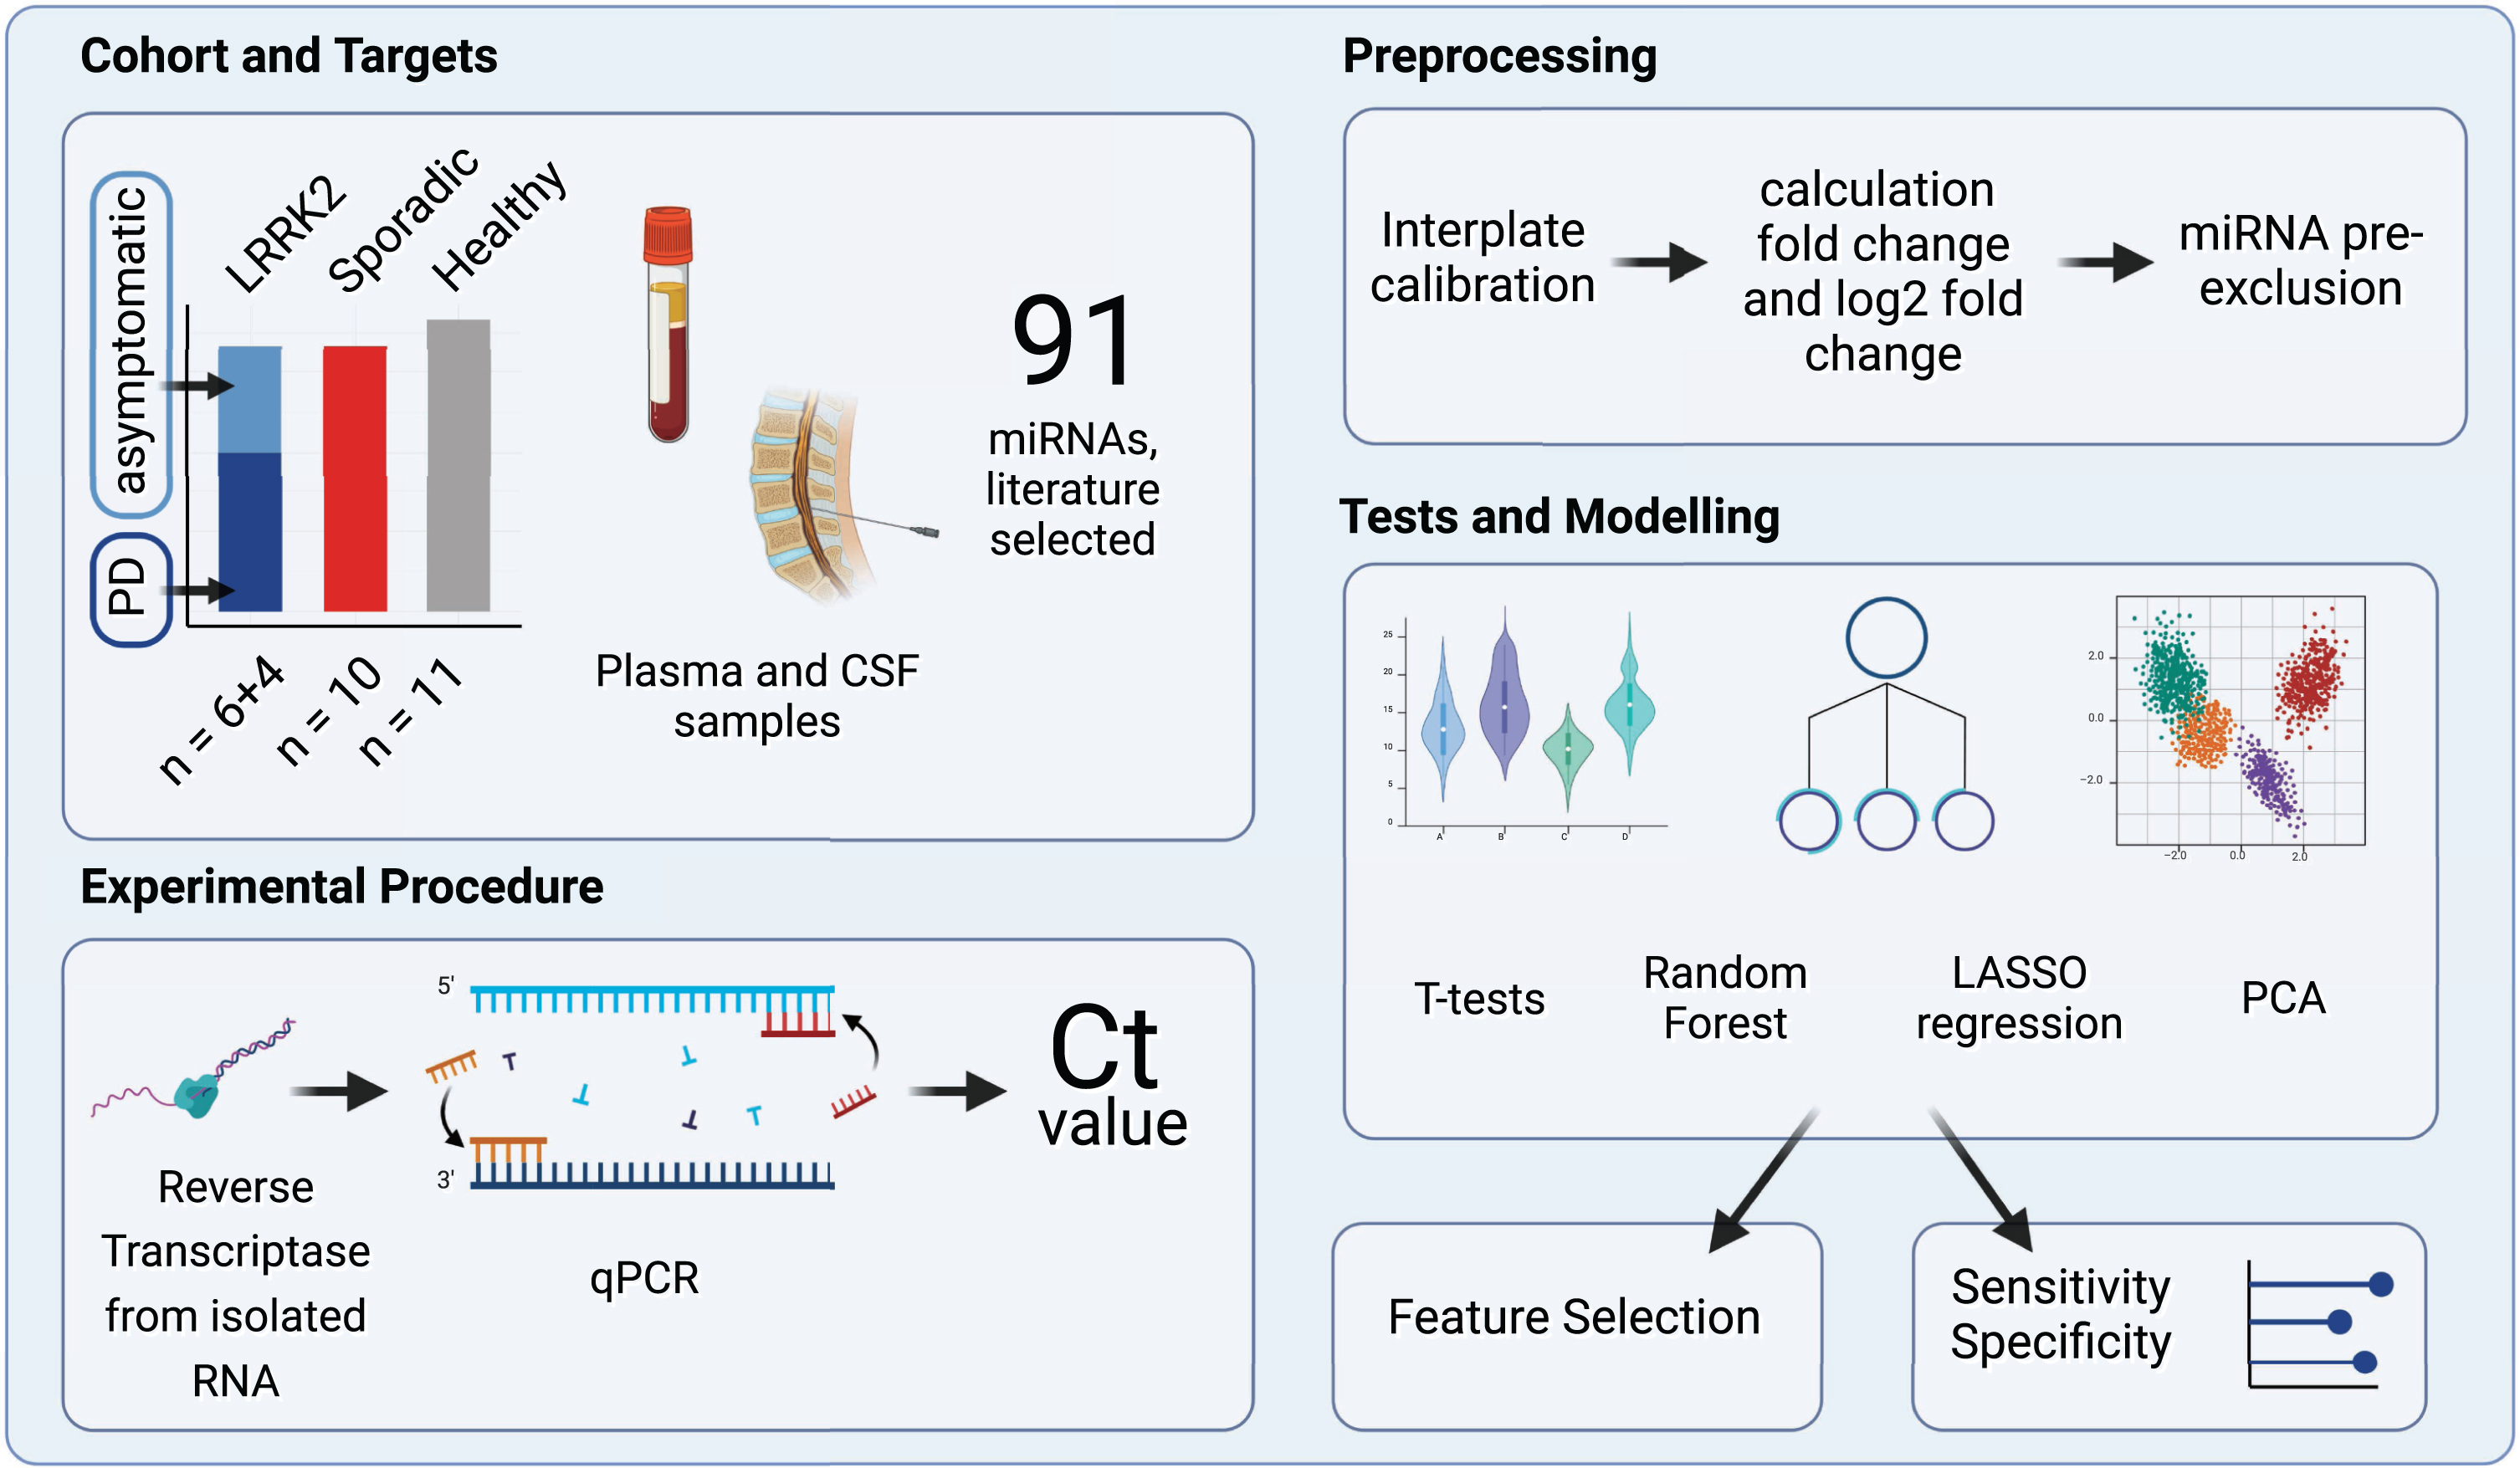 Study Design Overview. The experimental cohort compromised 31 patients categorized into three groups: individuals carrying a LRRK2 mutation, sporadic PD patients and healthy controls. A total of 91 miRNAs, selected by reviewing relevant literature, were quantified in CSF and plasma samples using reverse transcription and qPCR. Subsequently, the obtained raw Ct values were calibrated and fc and log2fc values were calculated. miRNAs that were expressed only in subgroups were excluded. Group differences were then analyzed using t-tests, PCA, Random Forest and LASSO regression. Created with BioRender.com.